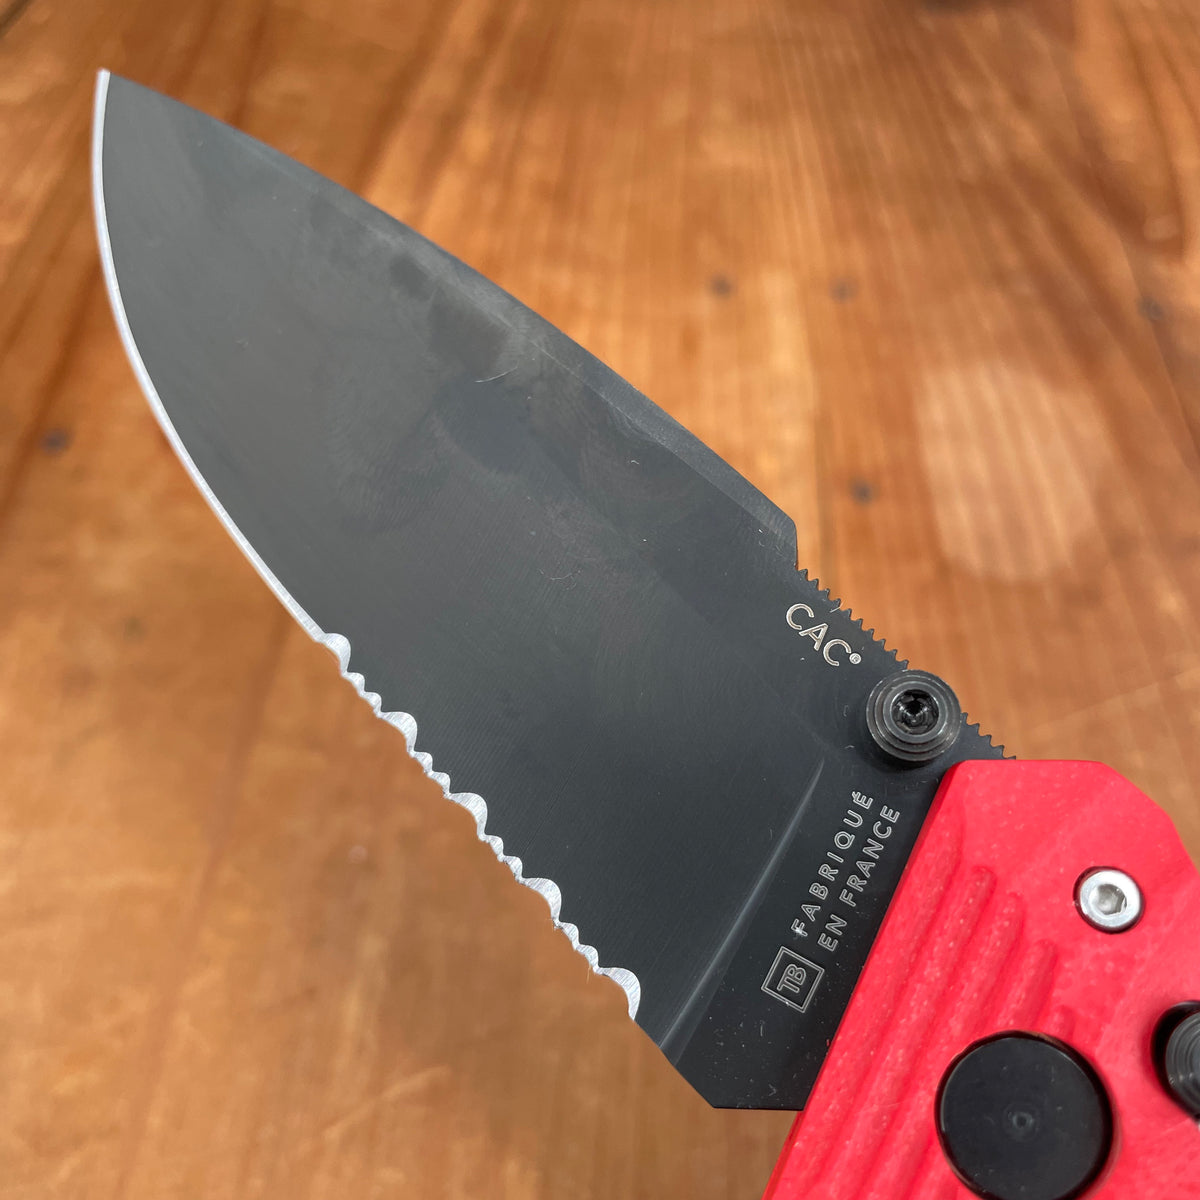 Tarrerias-Bonjean Outdoor C.A.C. S200 Pocket Knife Axis Lock Red